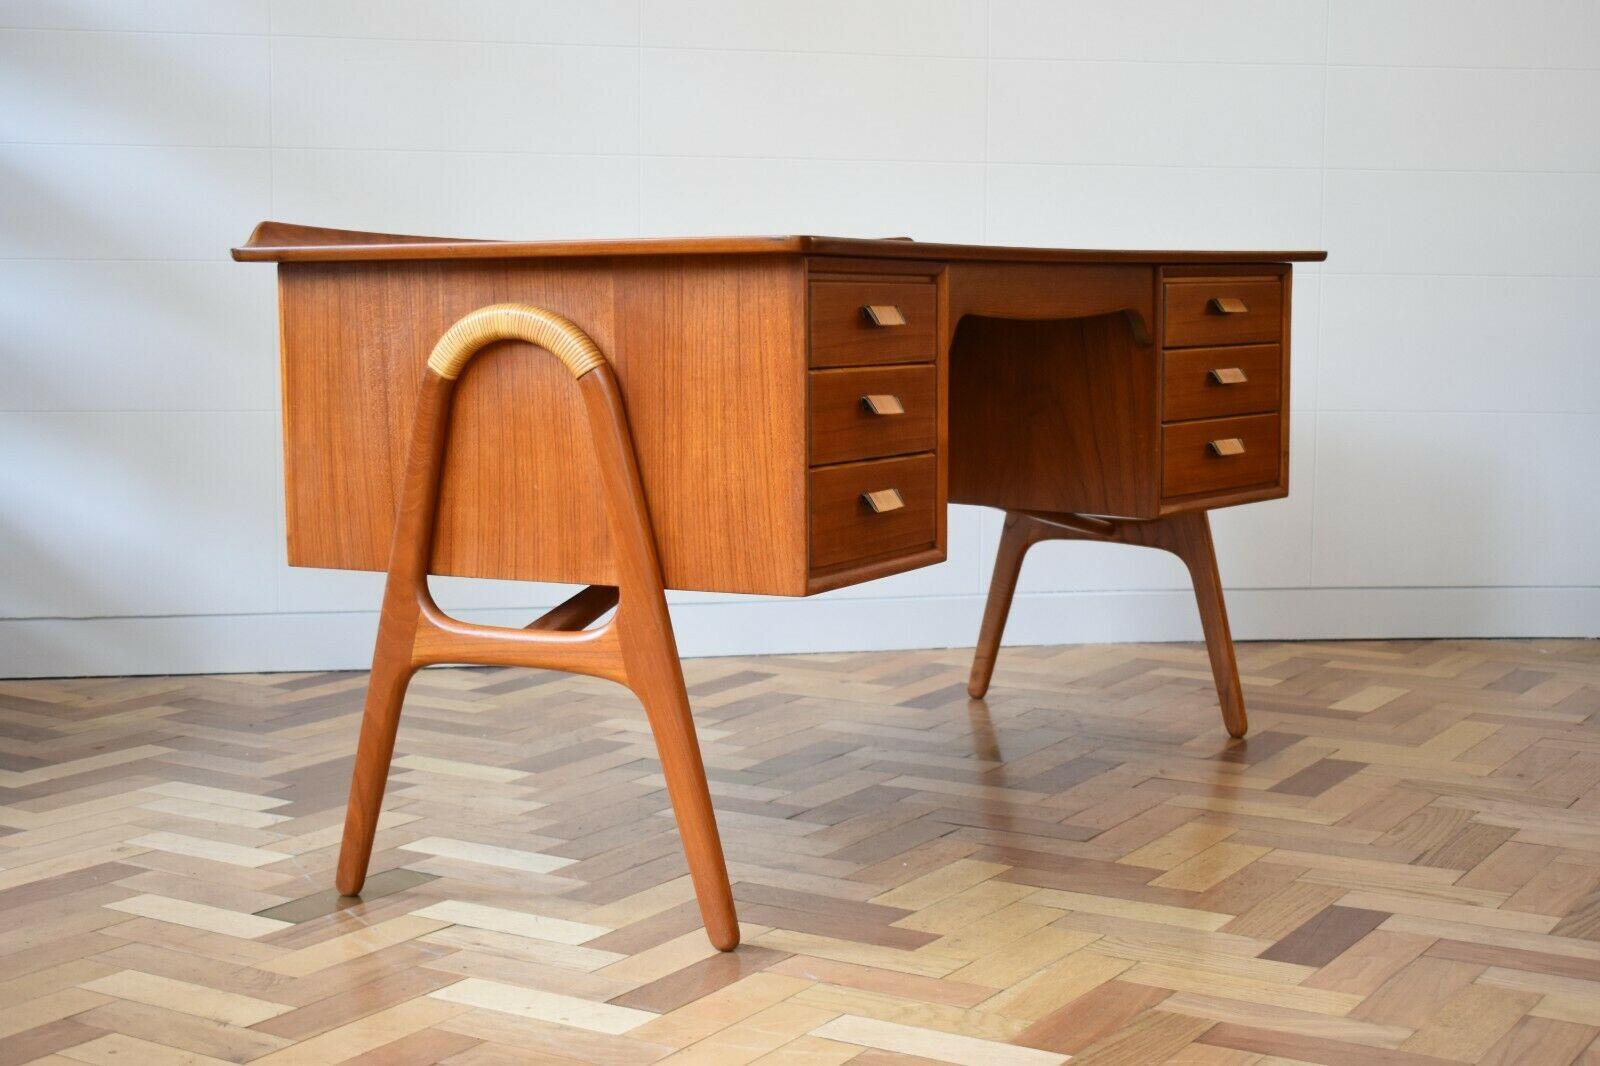 This beautiful and rare teak desk is design of Svend Aage Madsen, manufactured by Sigur Hansen Møbelfabrik in the 1950s.

The gorgeous piece is characterised by its curved shape and features bamboo detailing on both the legs and draw handles. With